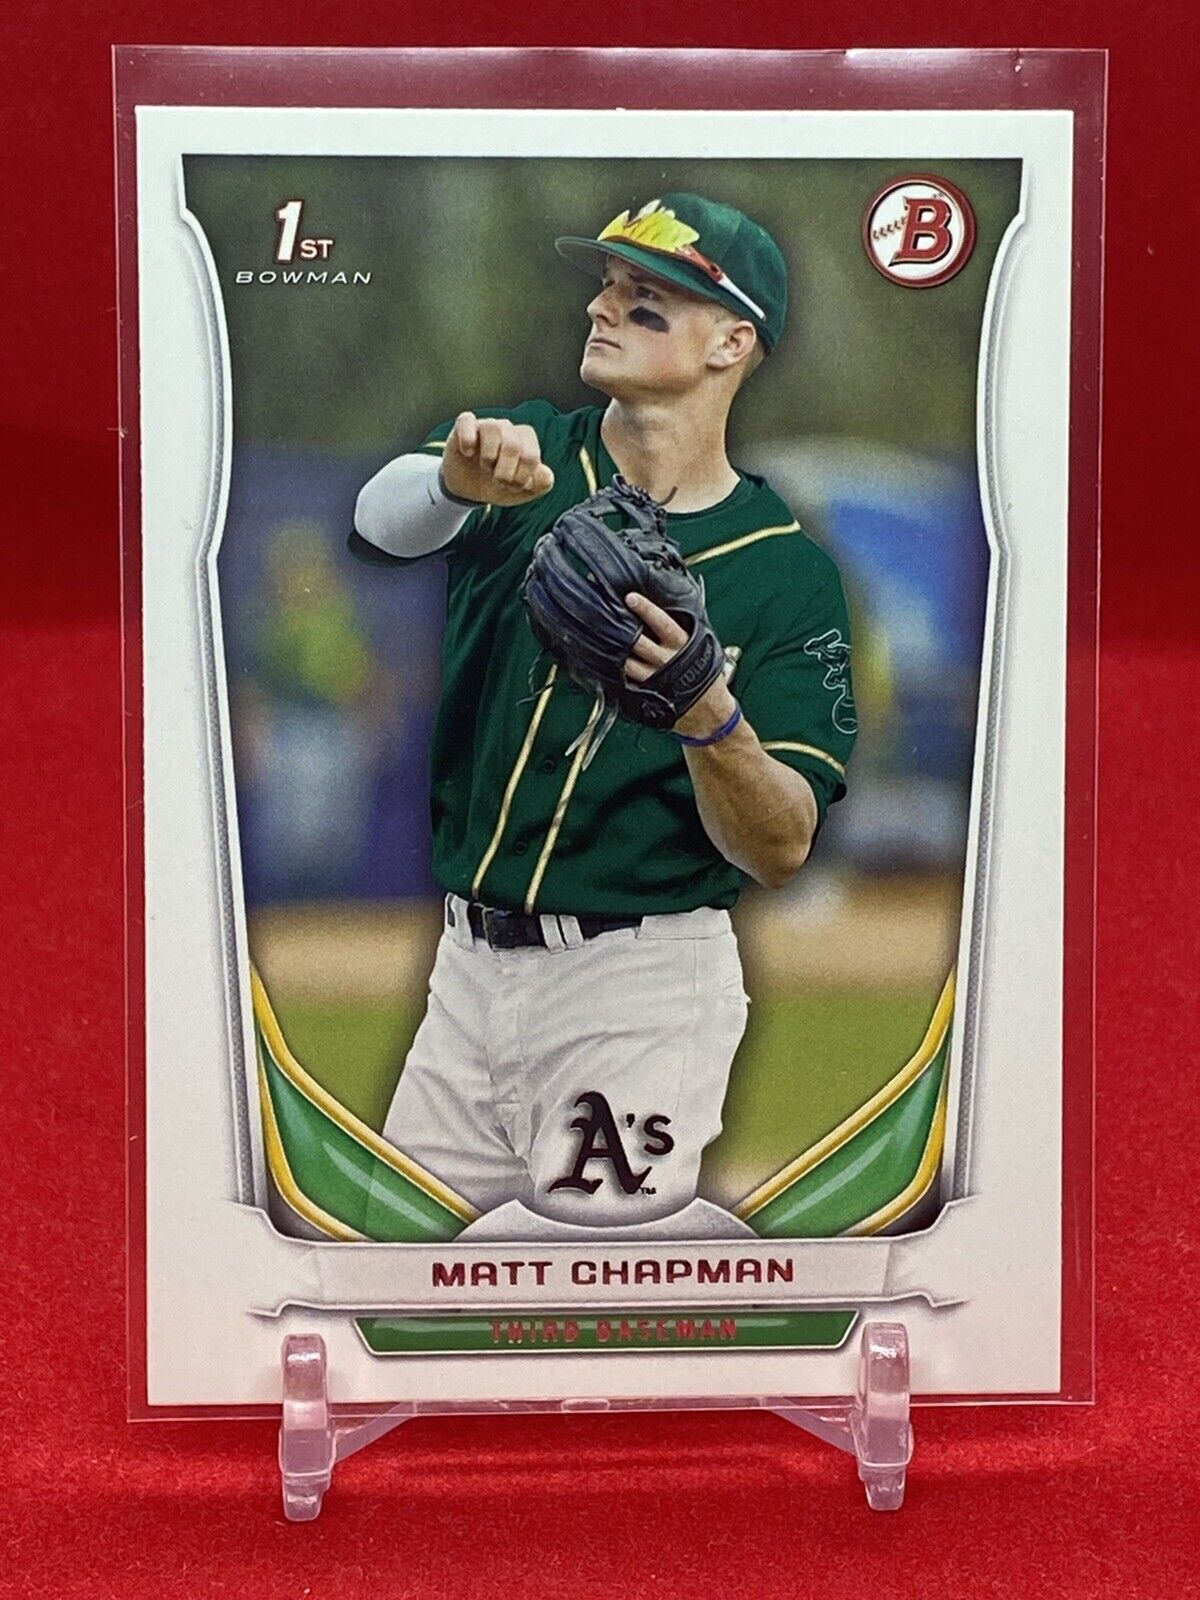 2014 Matt Chapman Rookie Card (Randomly Picked, May Not Be Same Design or Company as Pictured)